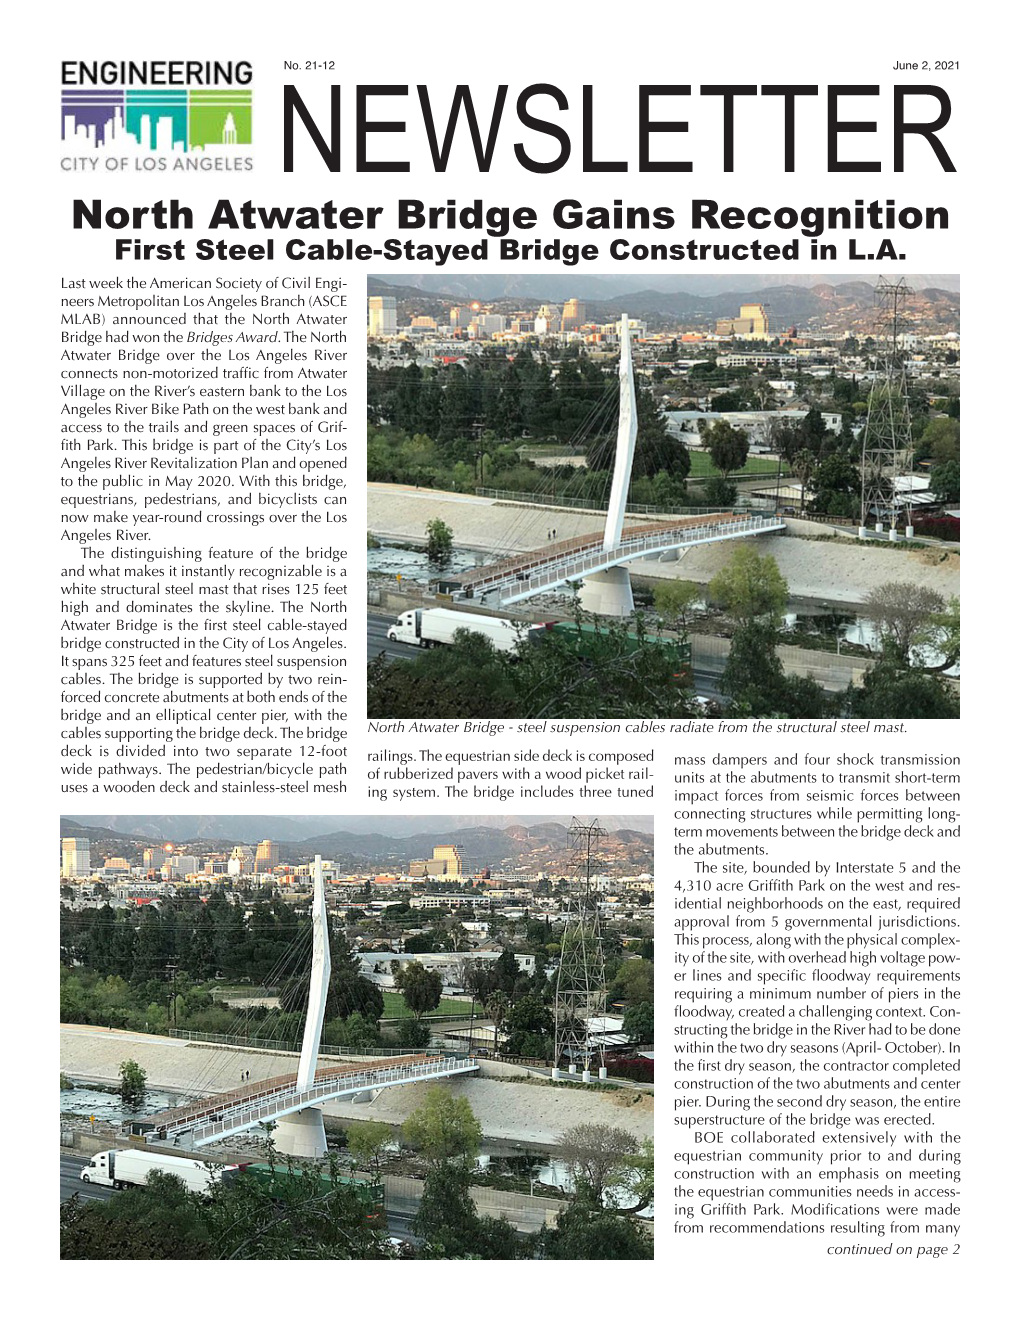 NEWSLETTER North Atwater Bridge Gains Recognition First Steel Cable-Stayed Bridge Constructed in L.A